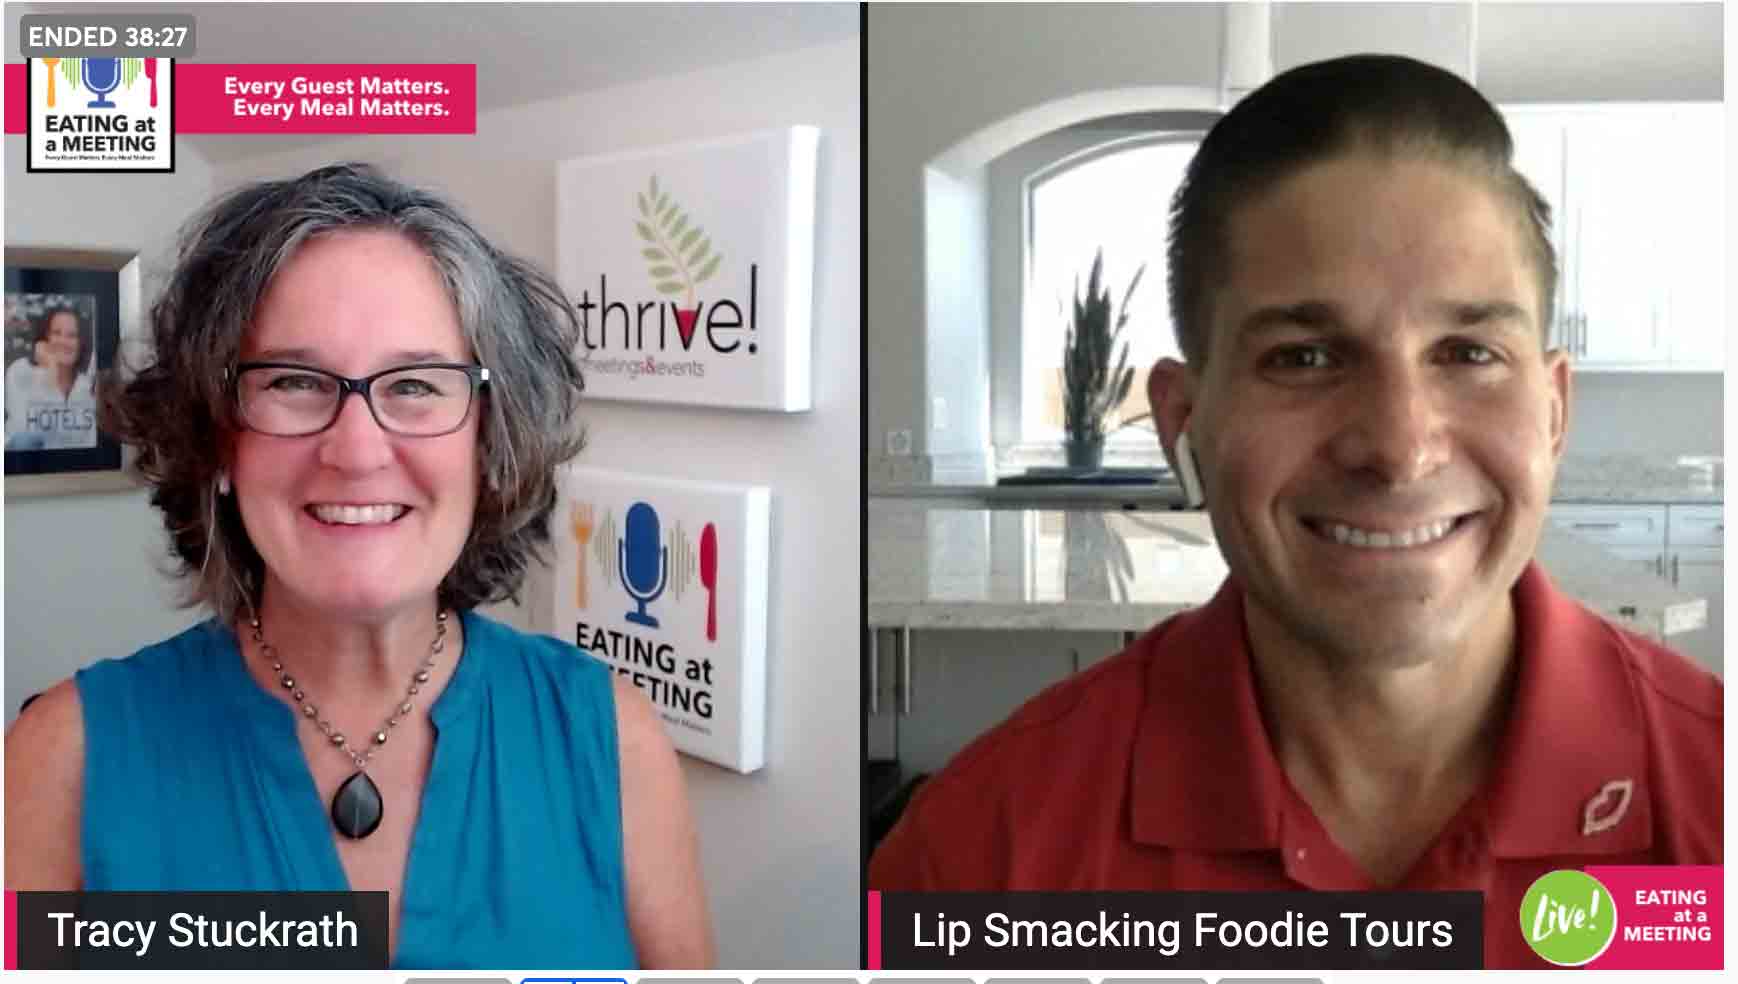 Smiling woman and man on video screen screen clip of them talking about Lip Smacking Foodie Tour